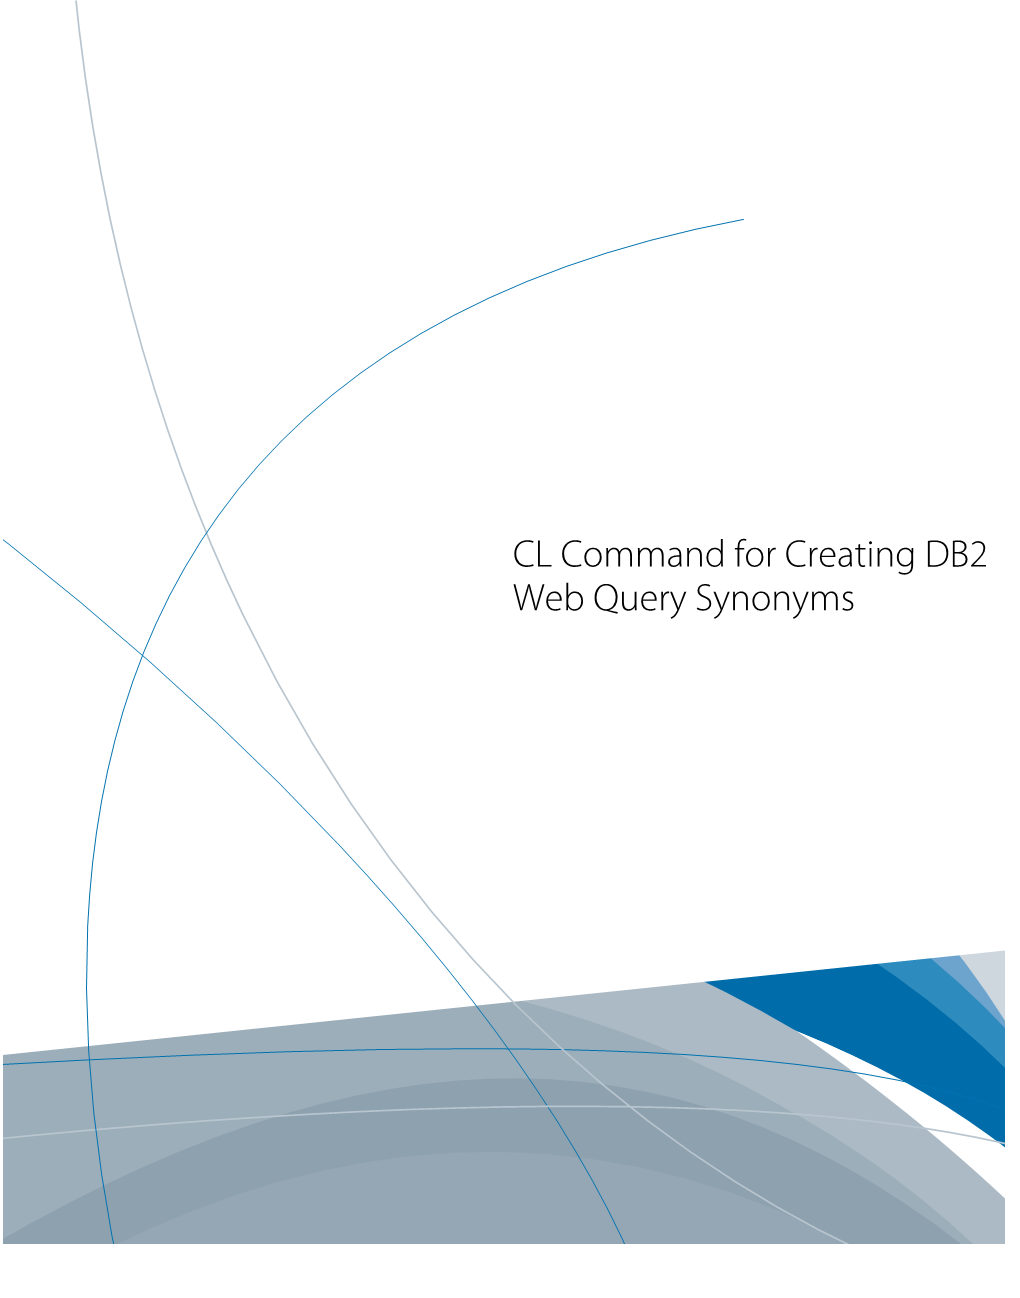 CL Command for Creating DB2 Web Query Synonyms